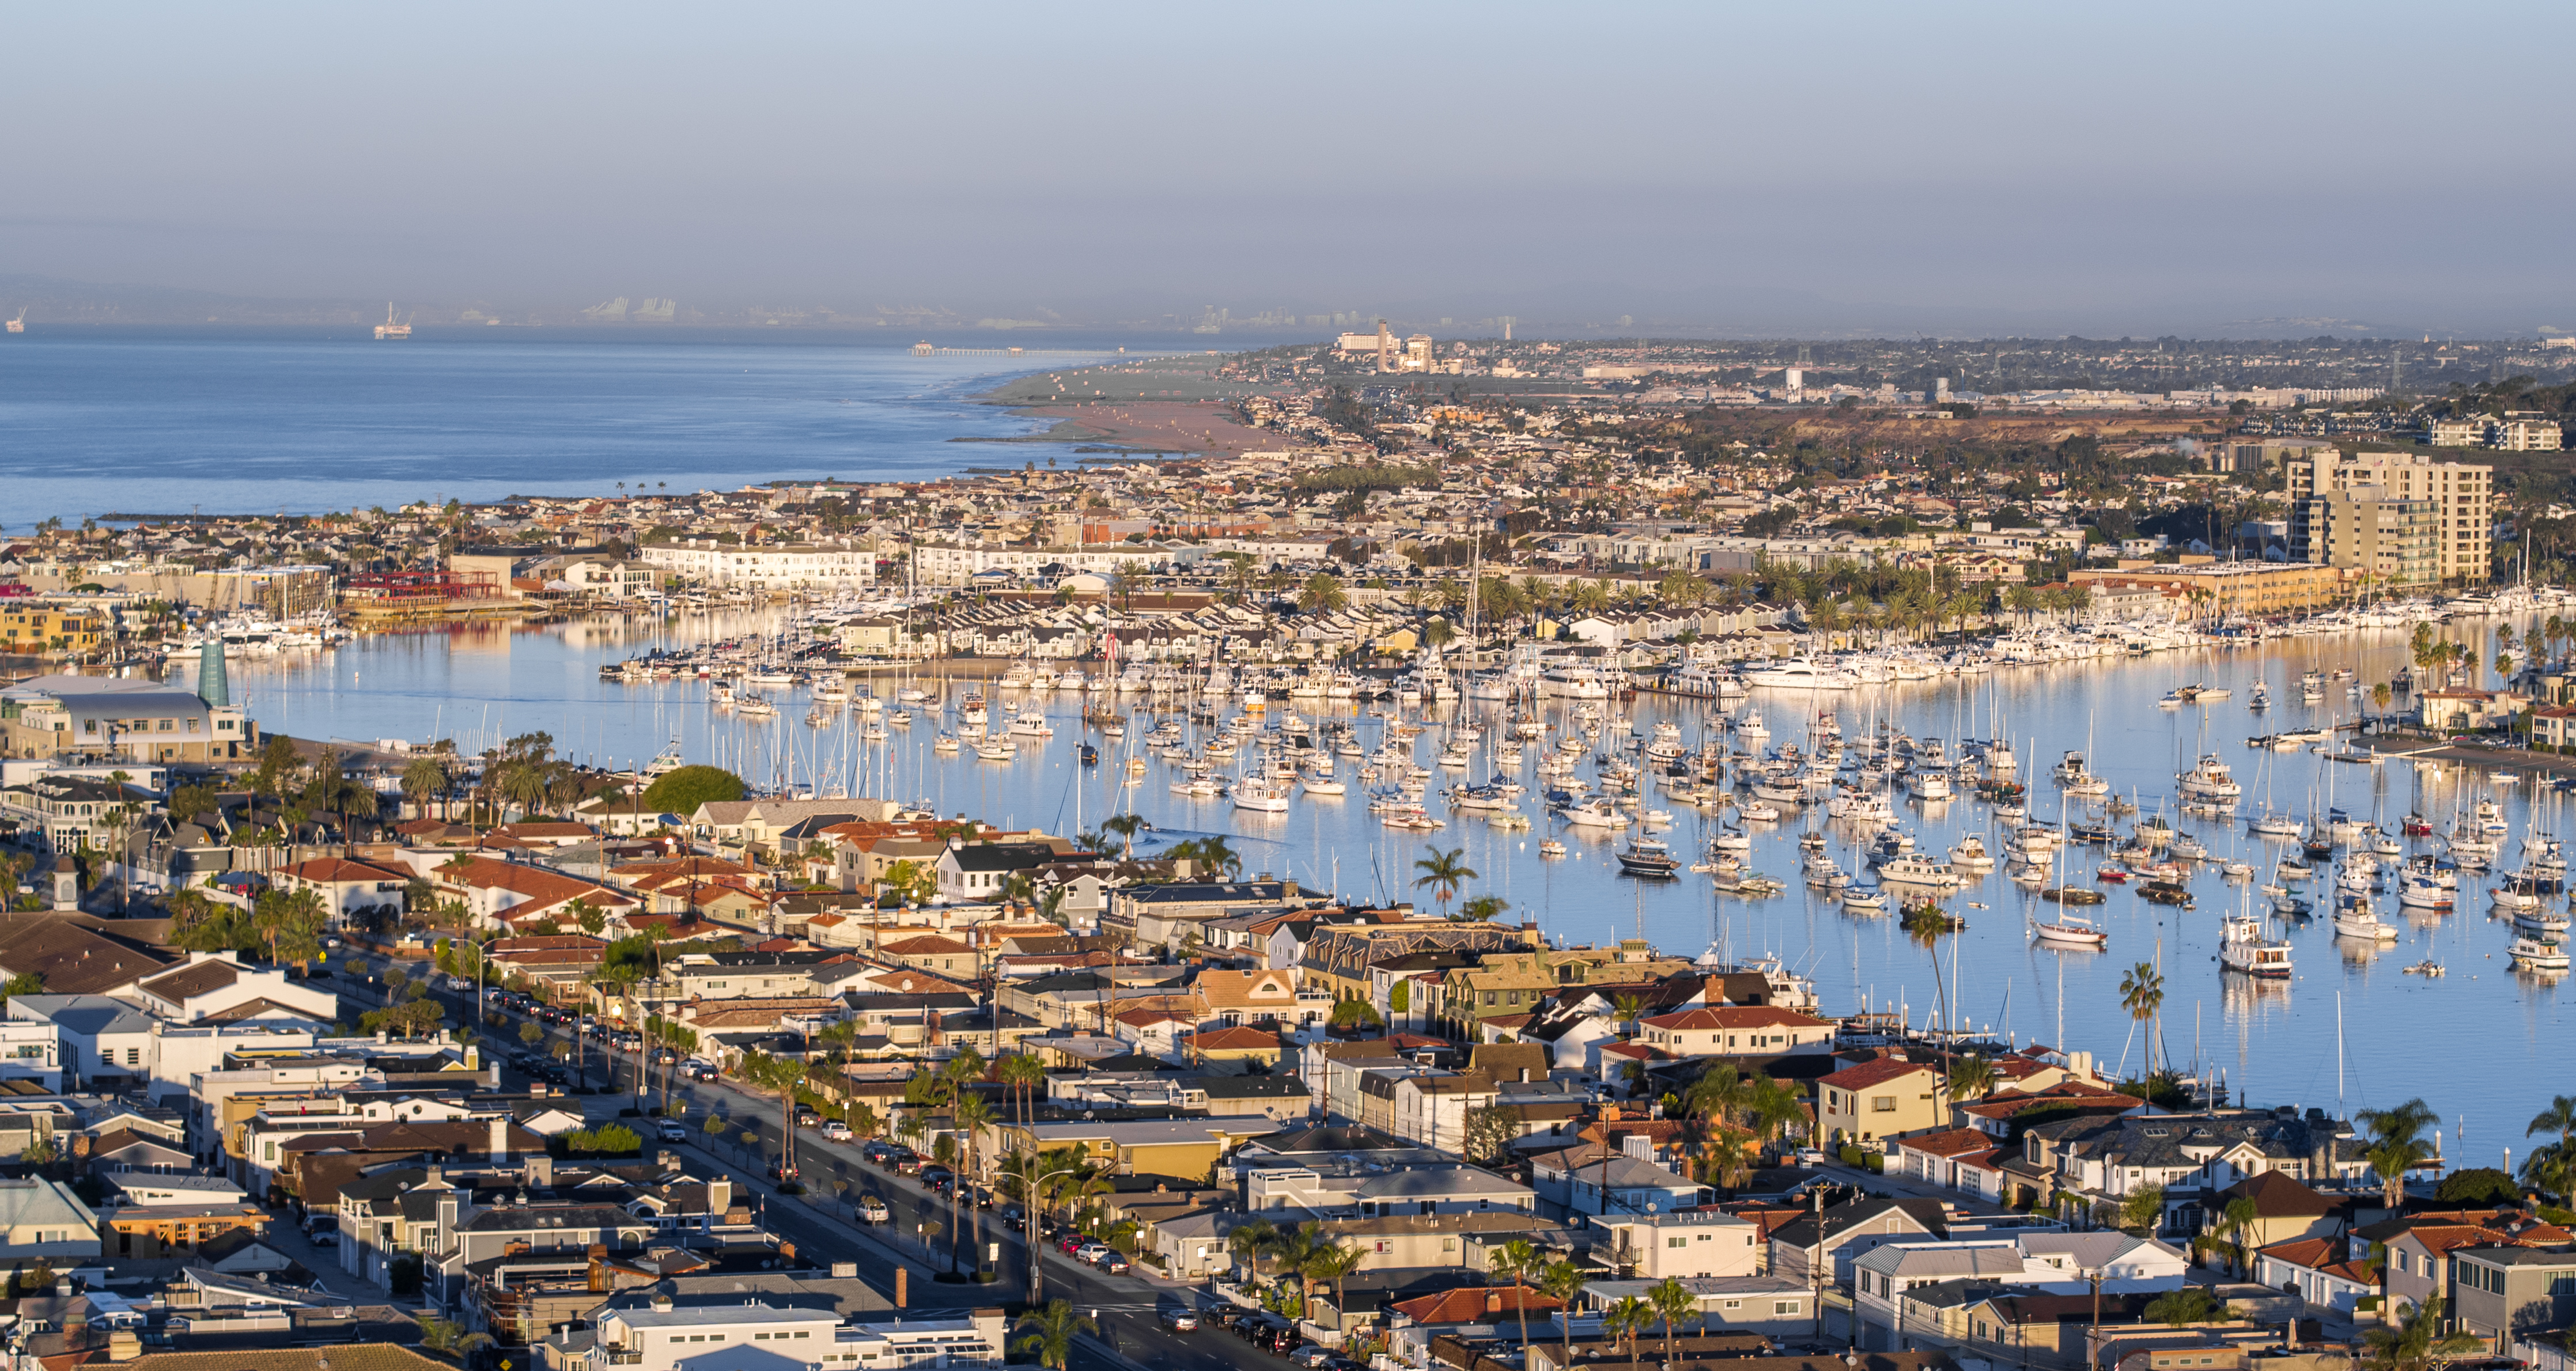 Newport Harbor with Huntington Beach in the background